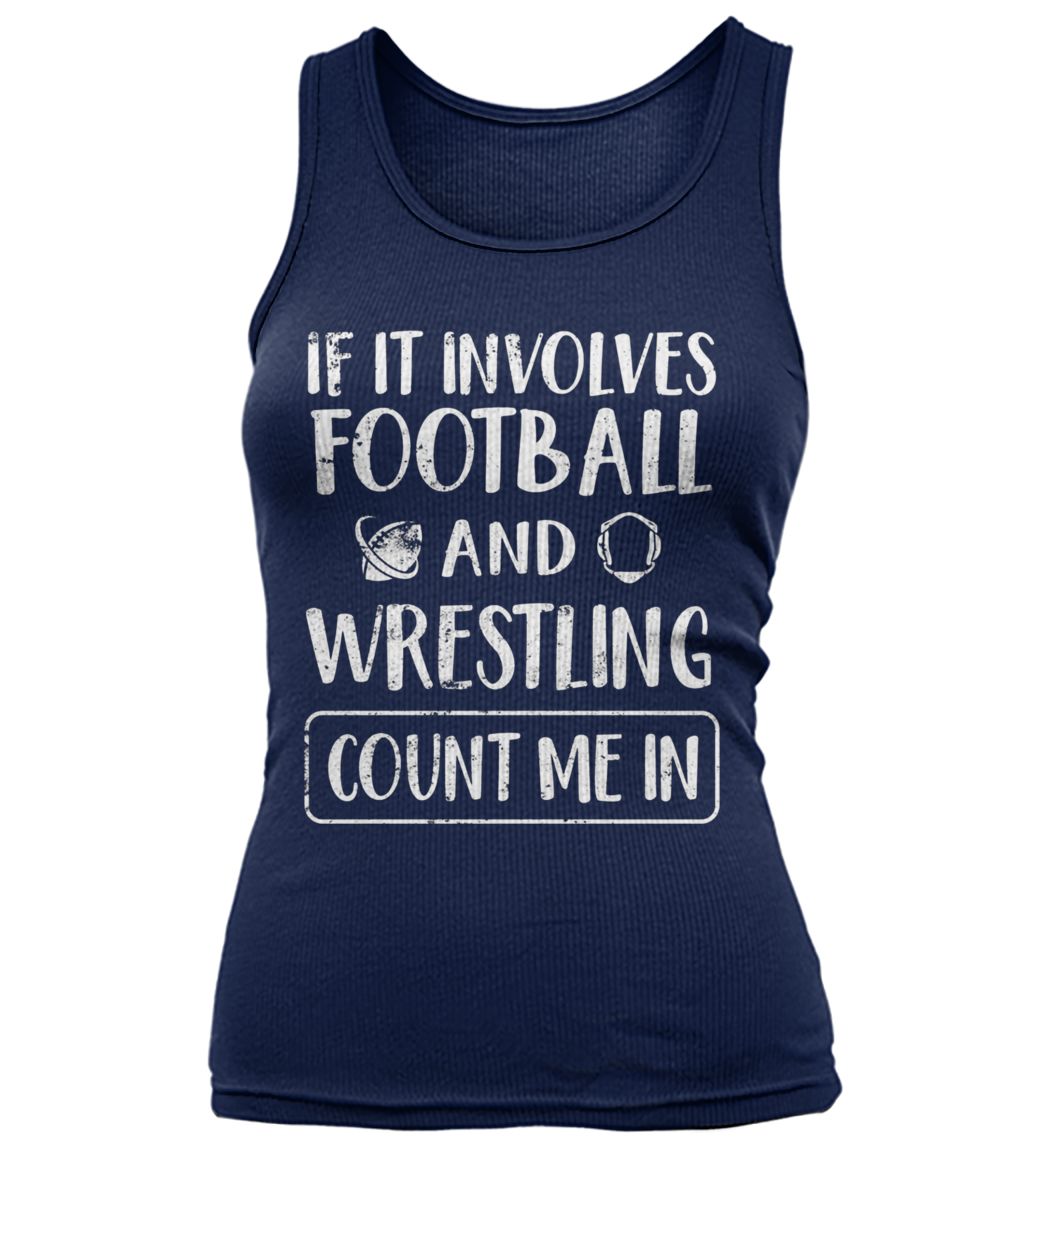 If it involves football and wrestling count me in women's tank top